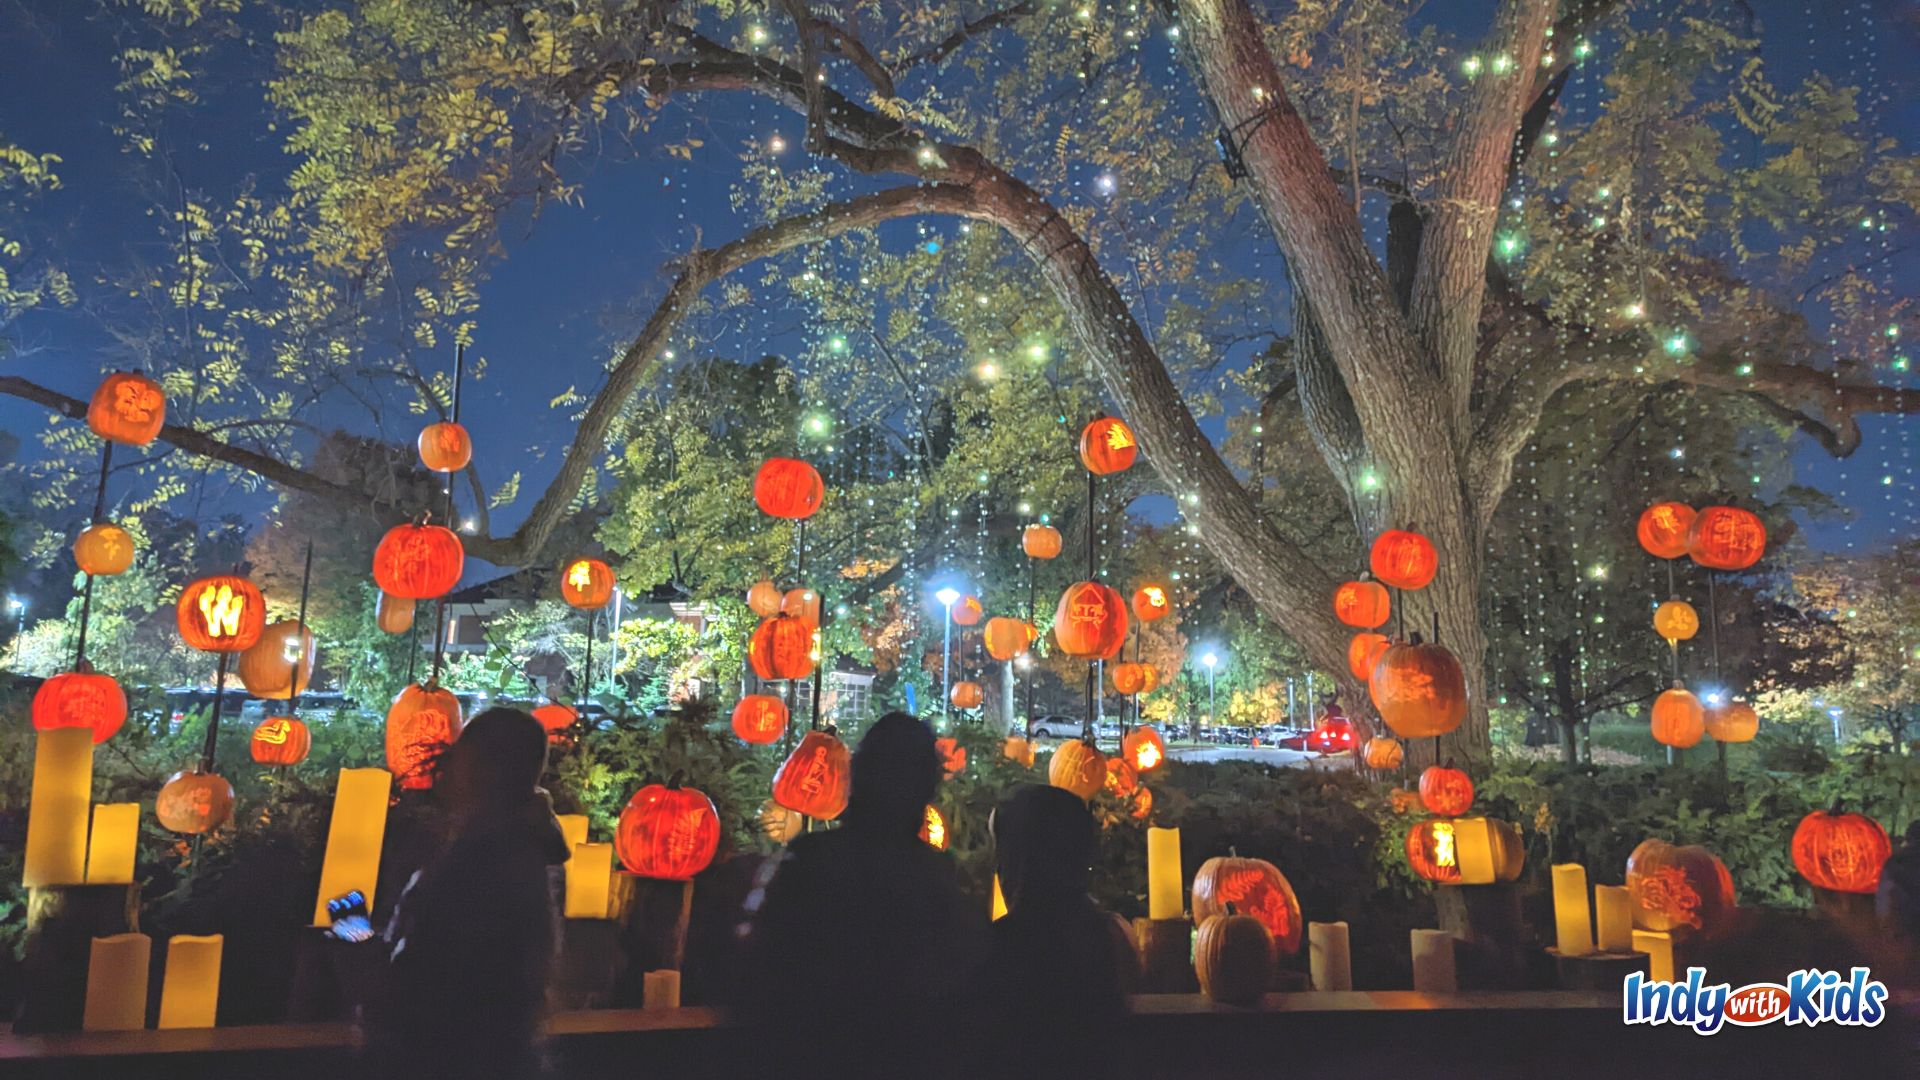 The twinkling tree and carved pumpkins at Newfields Harvest Nights are dazzling.